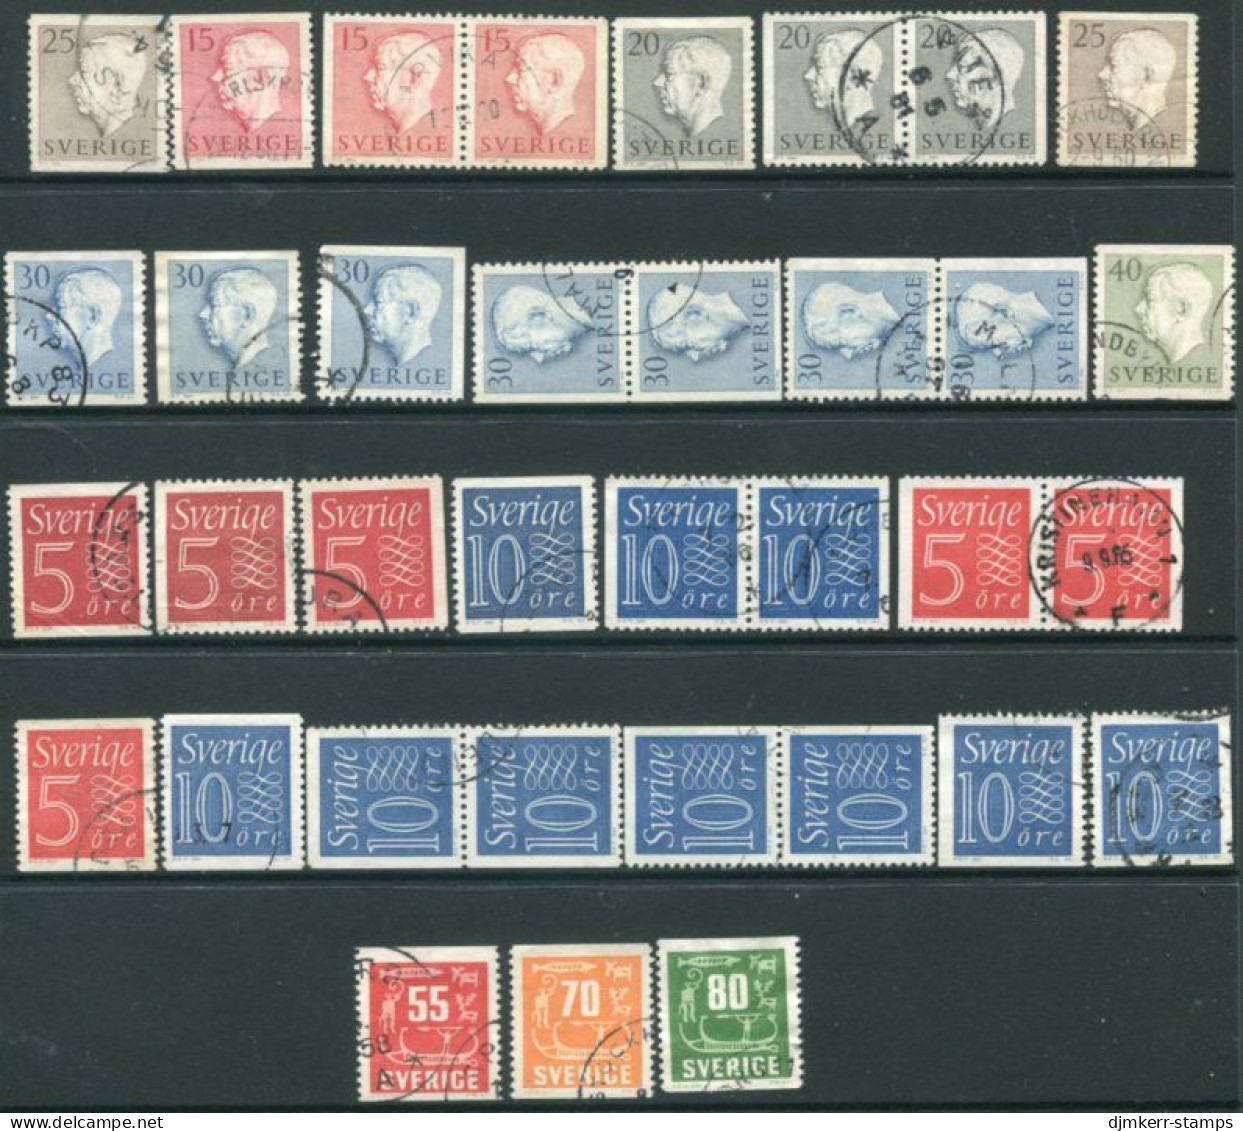 SWEDEN 1957 Complete Definitive Issues Used.  Michel 423-433 - Usados